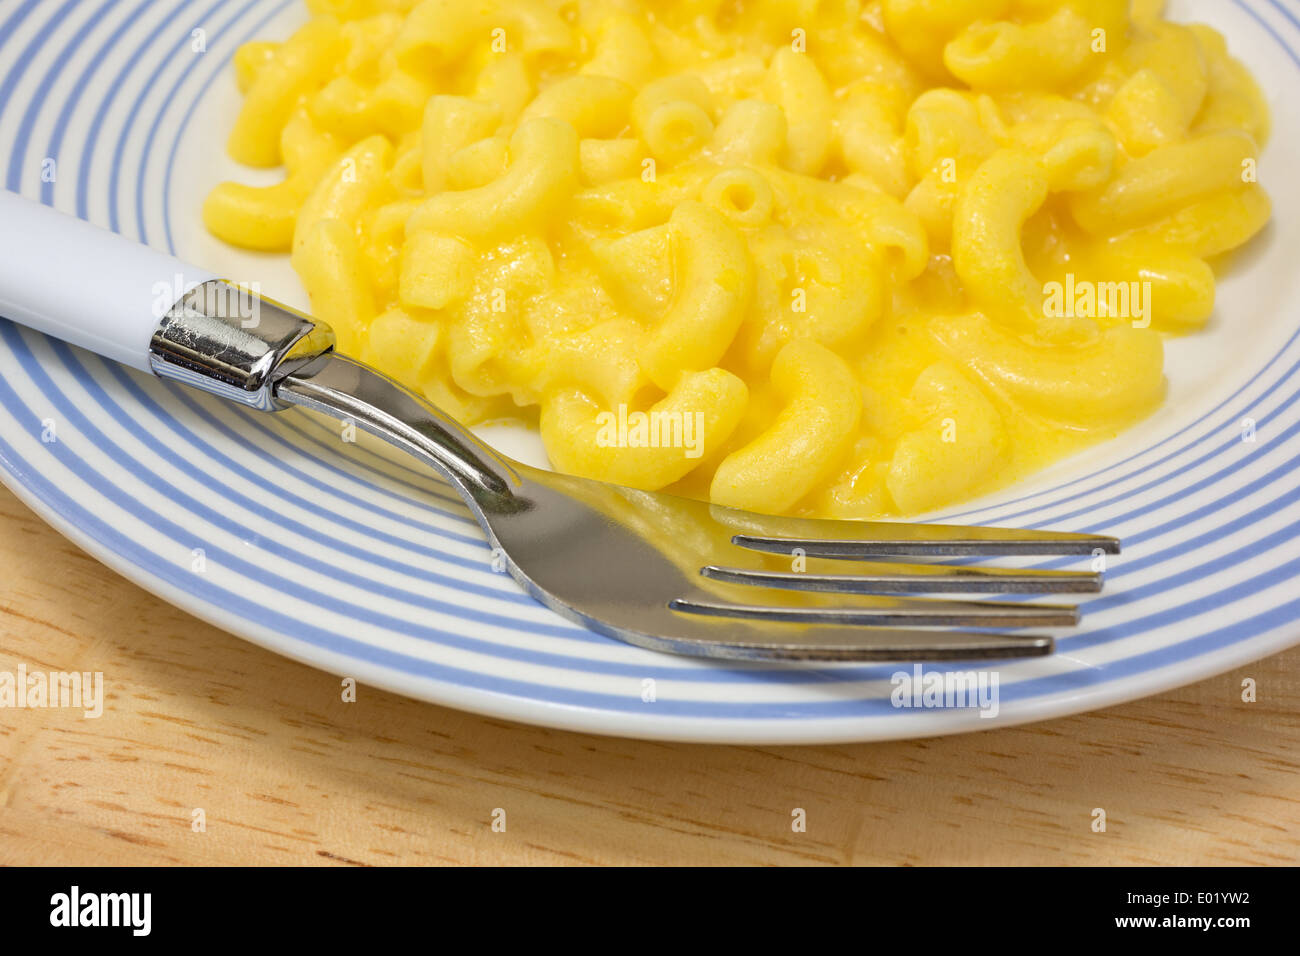 Close view of macaroni and cheese on a blue striped plate with fork on a dining table. Stock Photo